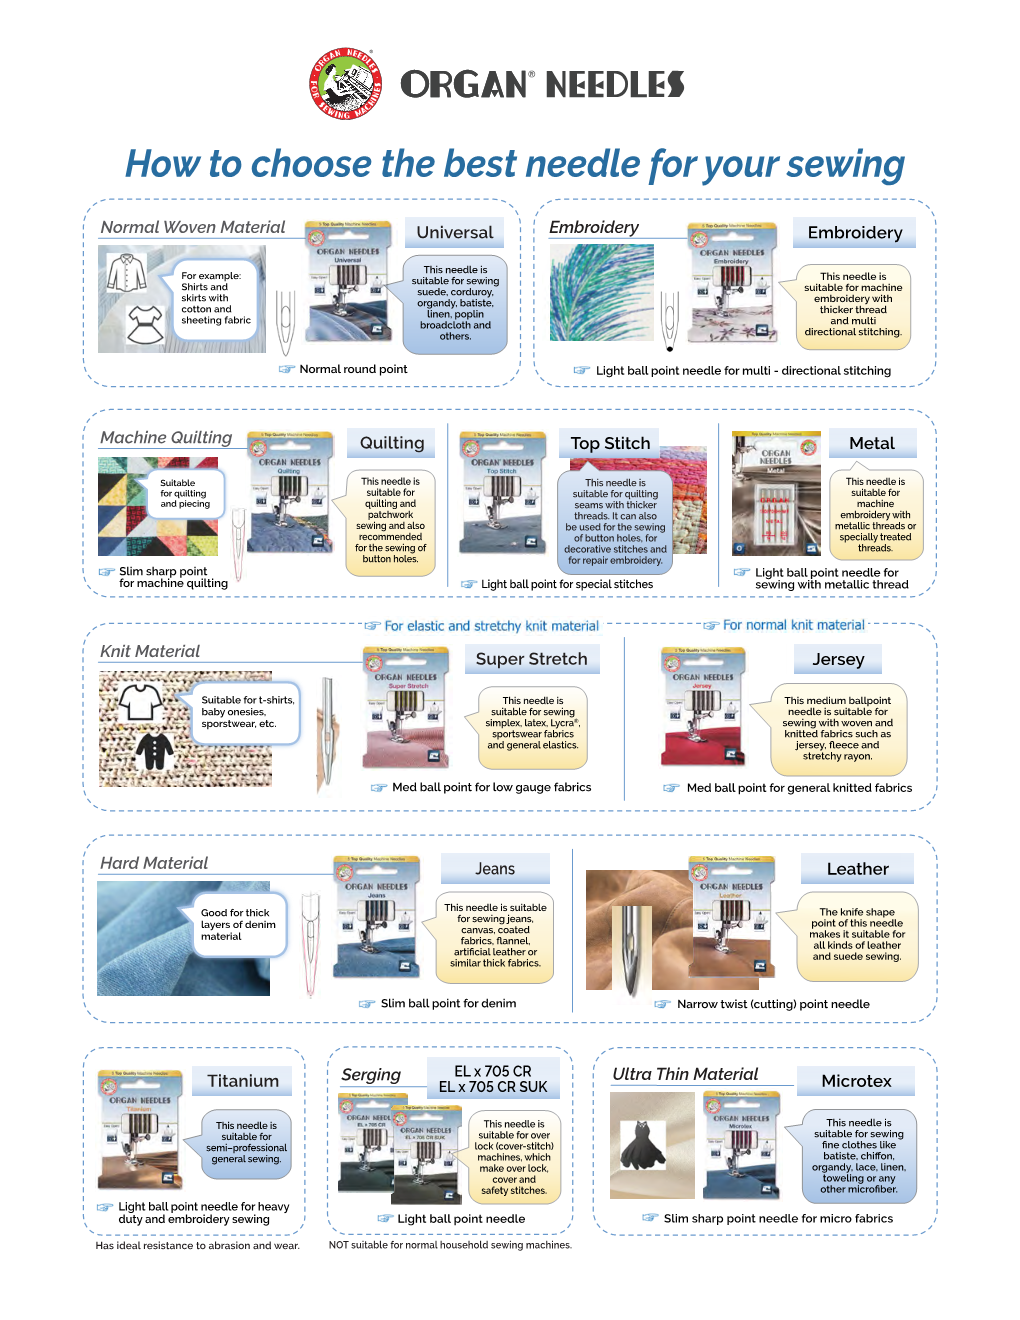 How to Choose the Right Needle Infogra